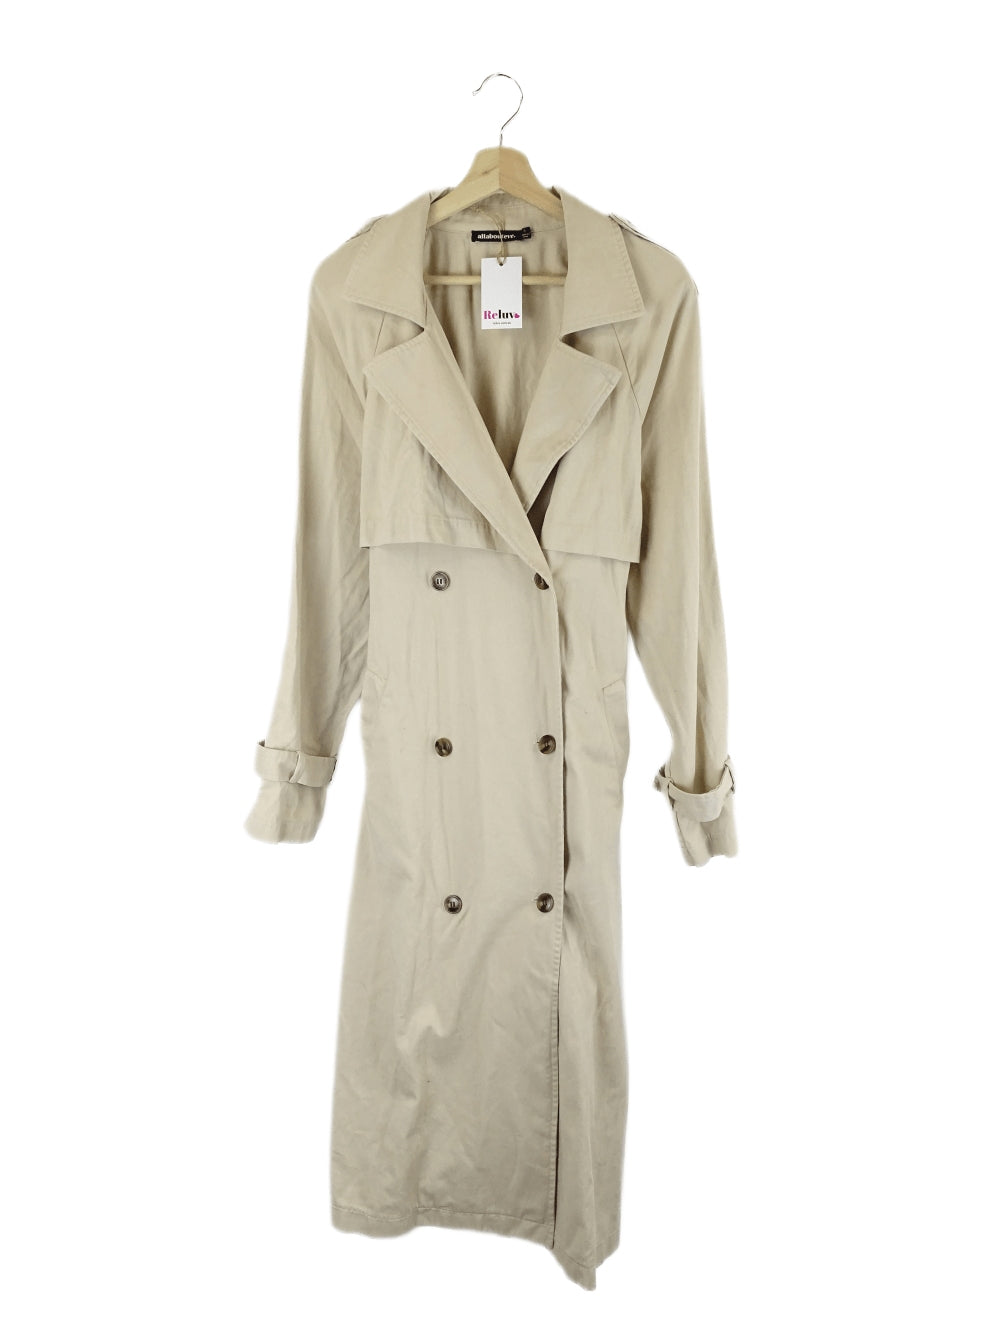 All About Eve Beige Trench Coat 8